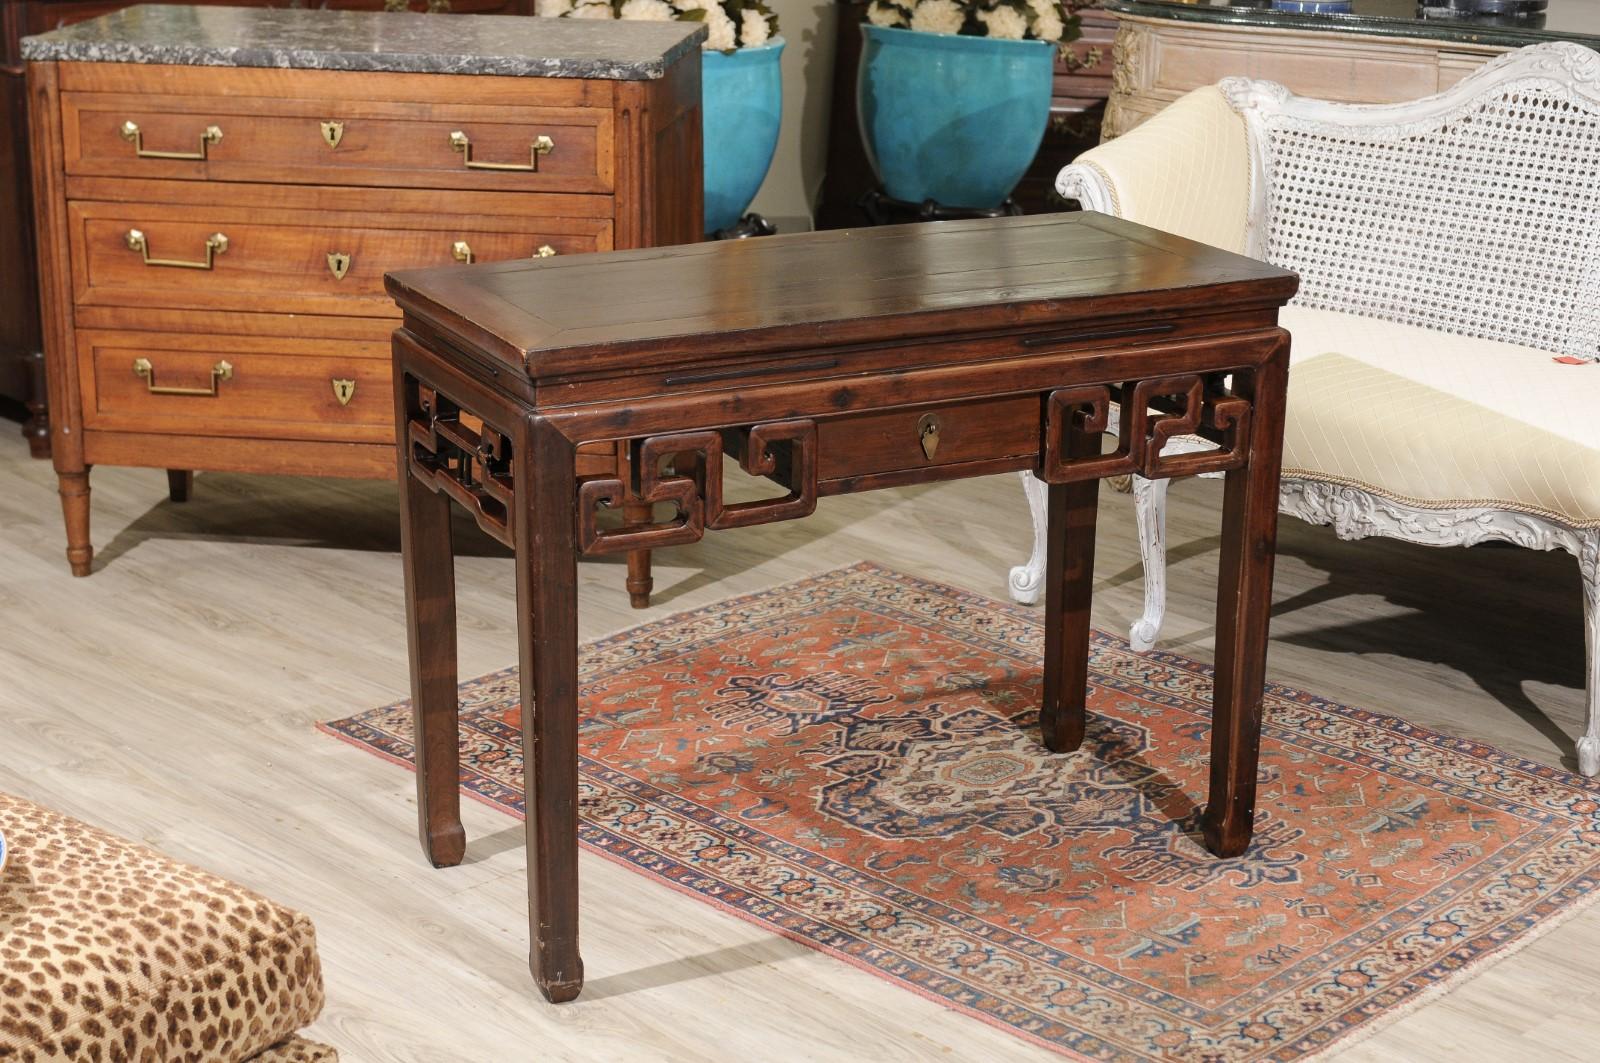 This sturdy wood console may be used as a desk. Simple design would work well in any room of the house. The fretwork on all sides is of the traditional Chinese style. One small drawer is in the center of the table. Supported by four straight legs.